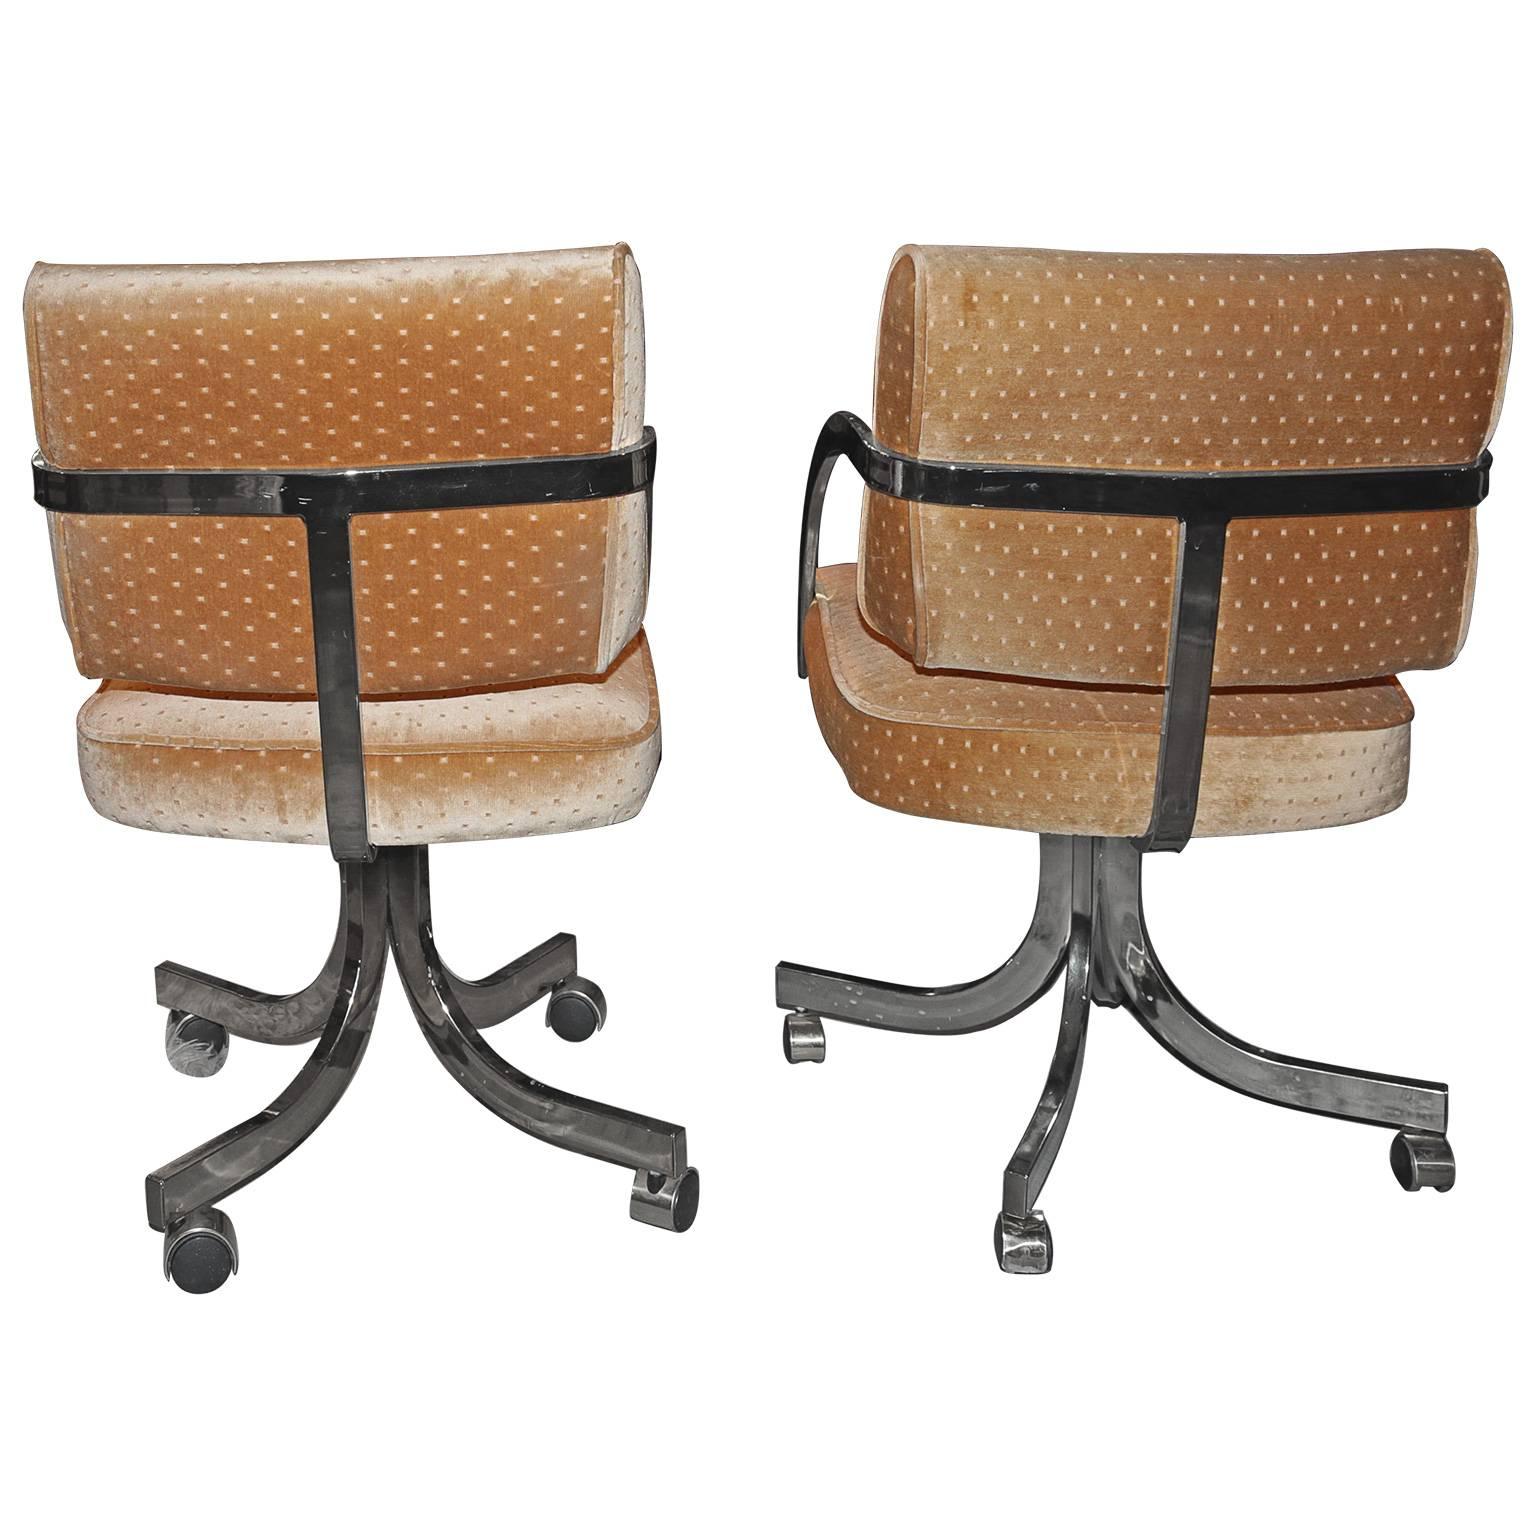 These elegant desk or office chairs are not only eye-catching but comfortable also. These chairs swivel and turn with ease and comfort. The polished bronze frame adds to the beautiful style of this air of armchairs.